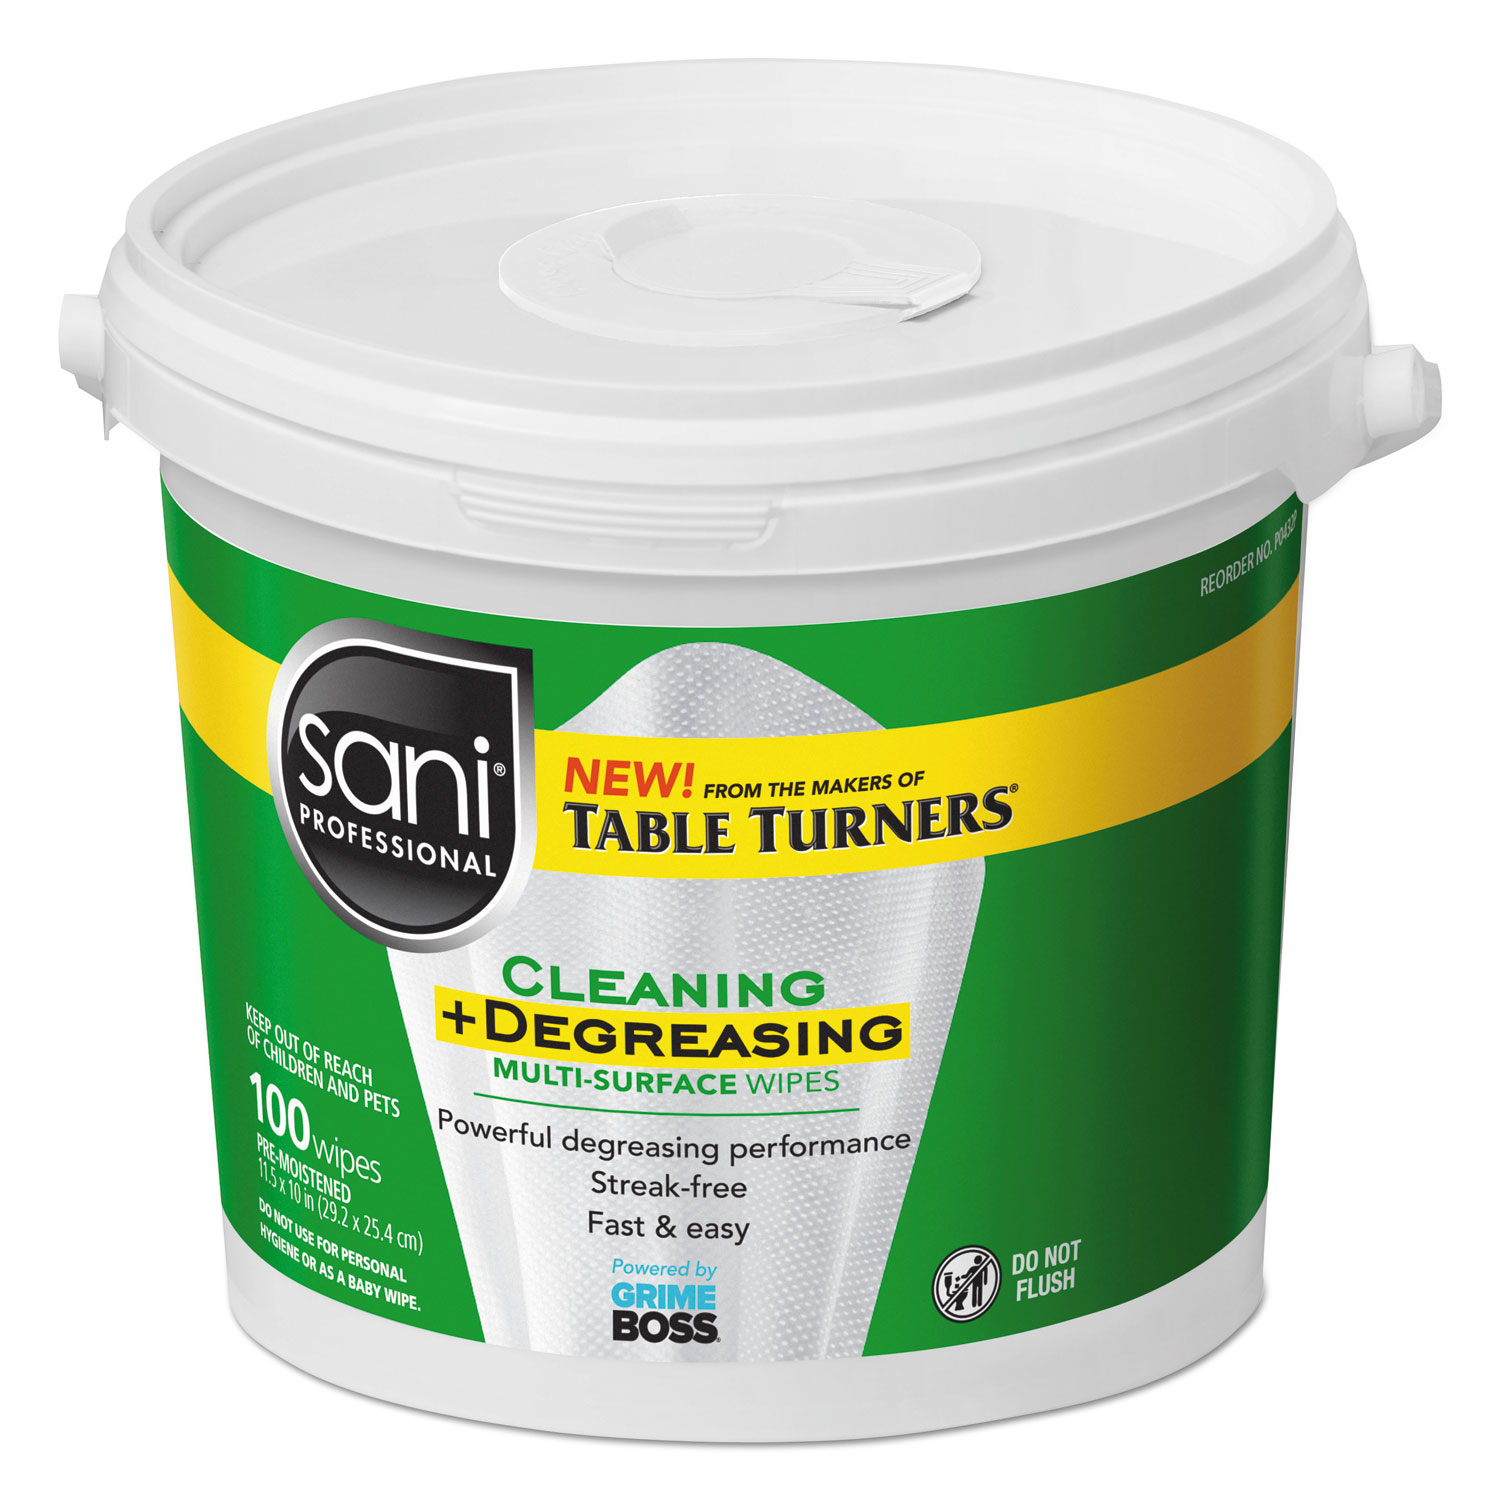  Sani Professional P0432P Multi-Surface Cleaning and Degreasing Wipes, 11 1/2 x 10, 100/Pail, 2 Pails/CT (NICP0432P) 